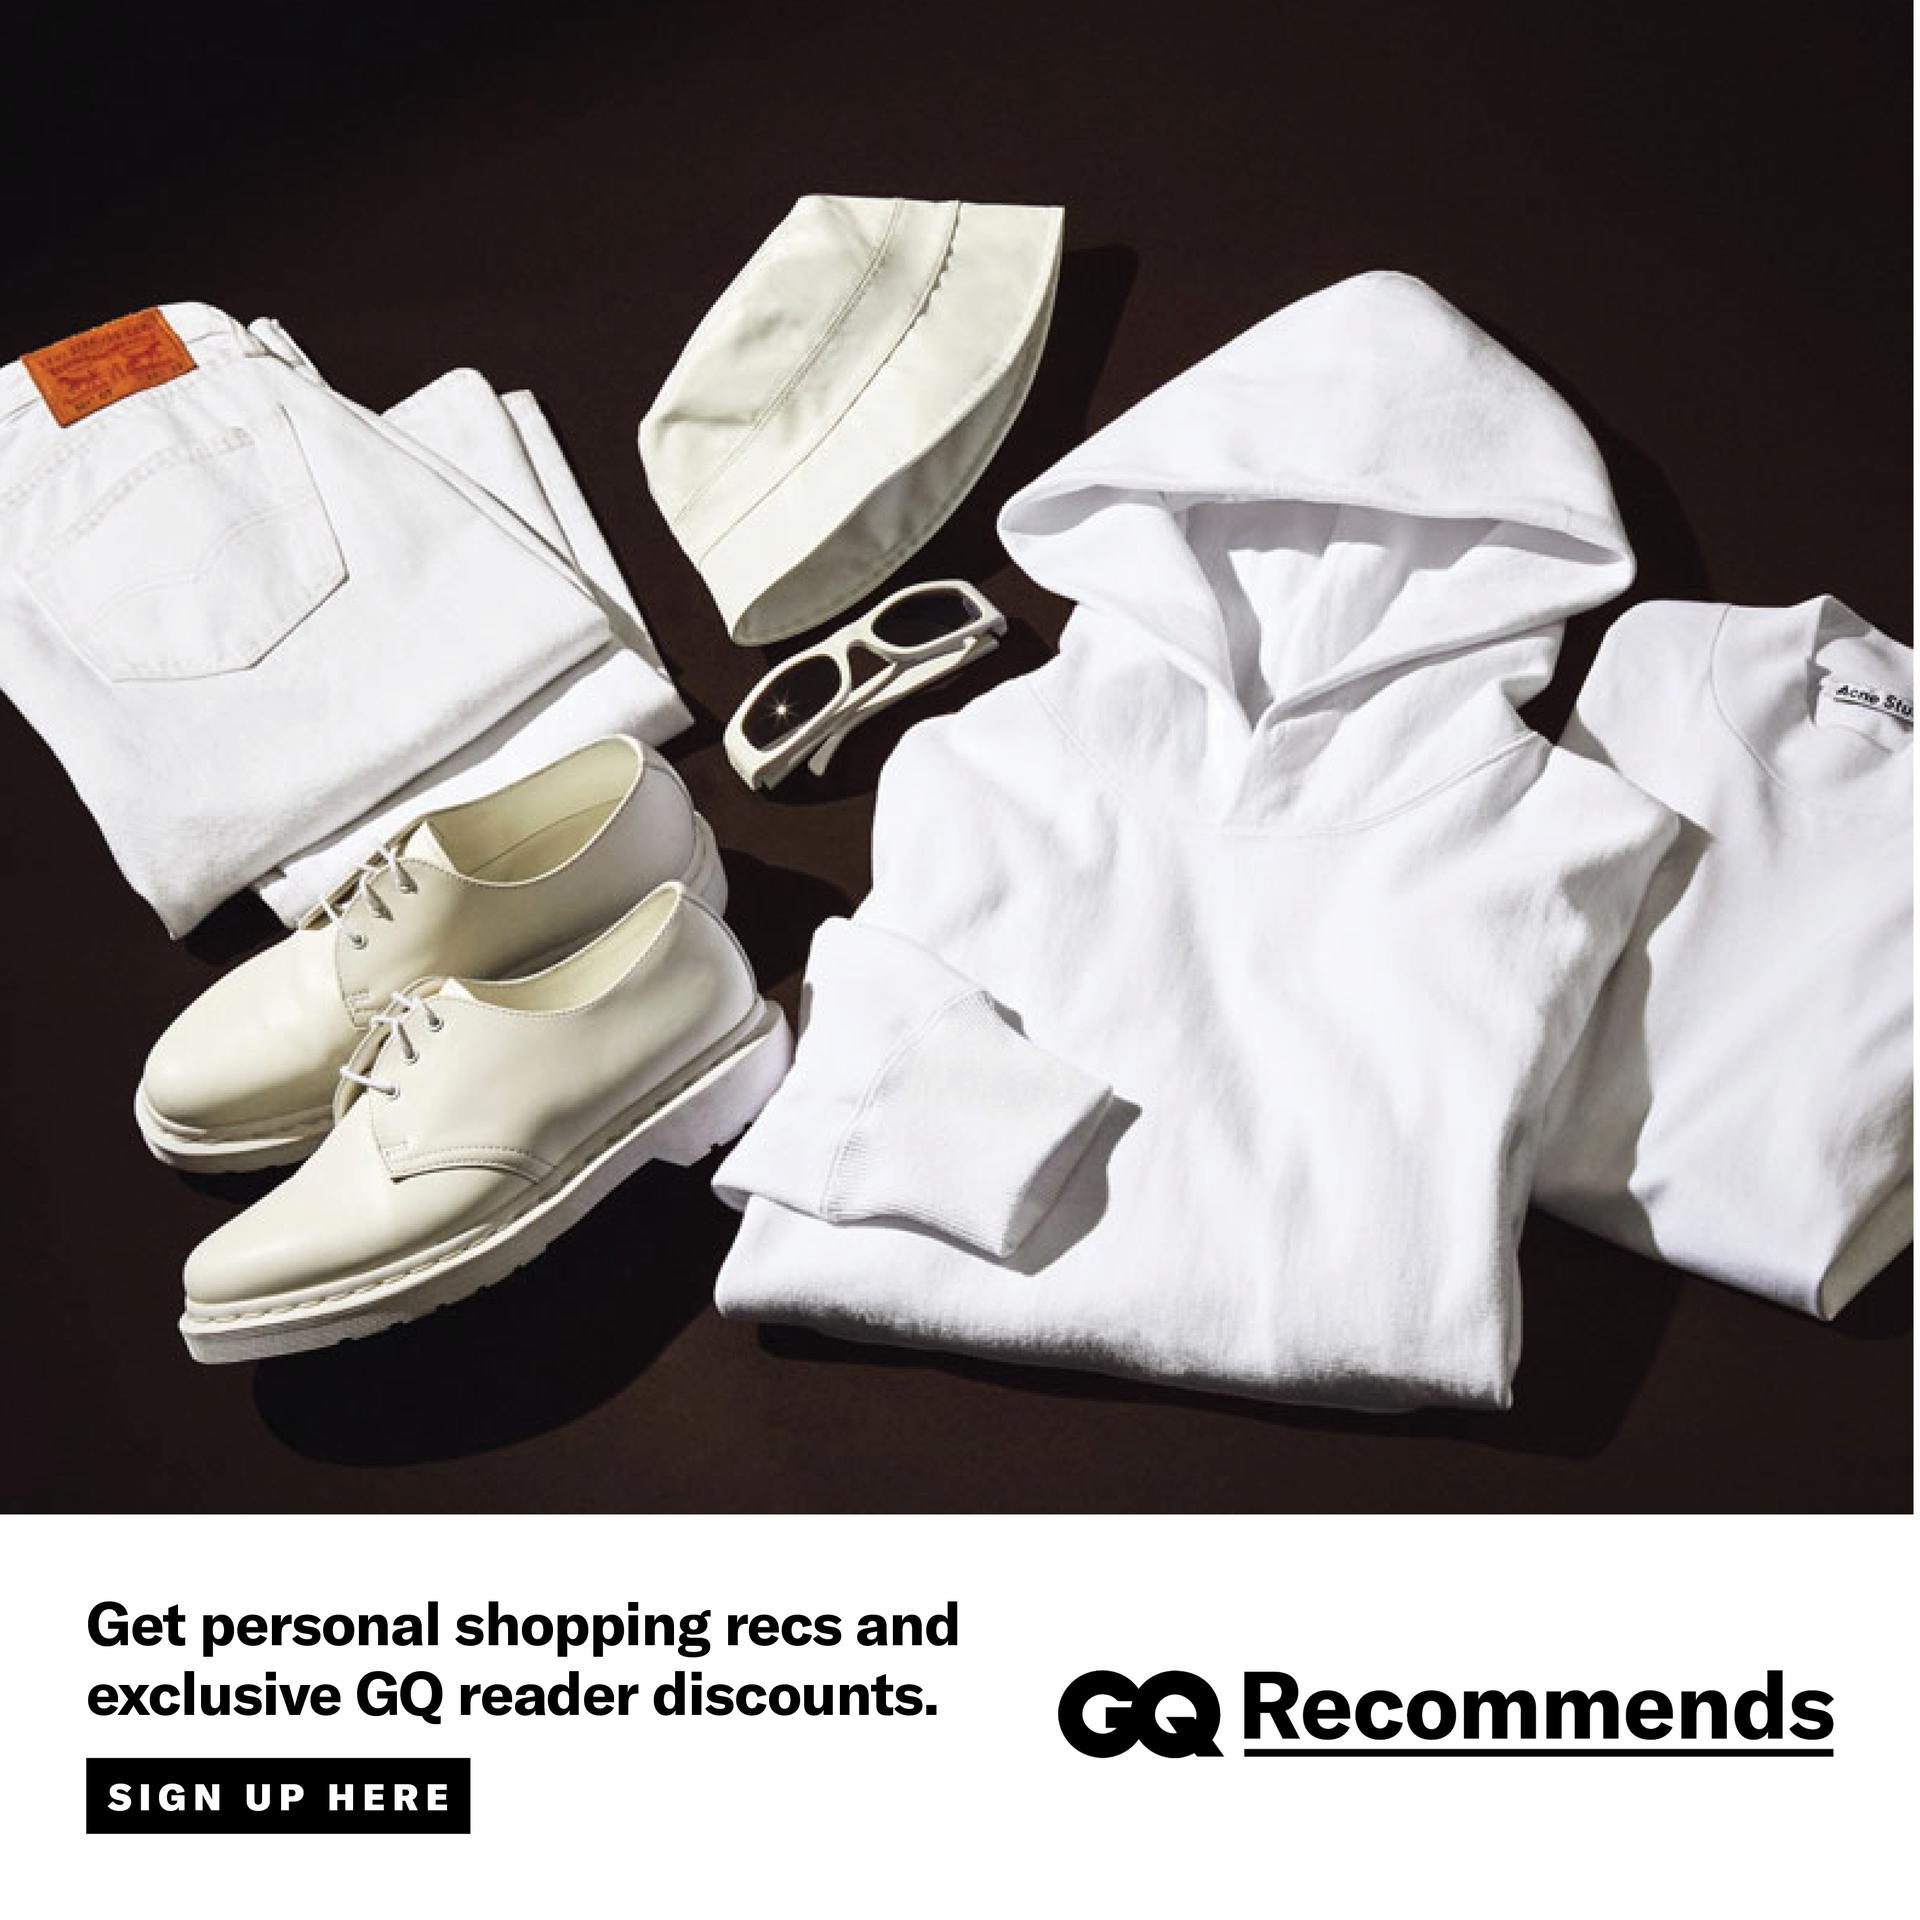 Sign up for the GQ Recommends newsletter